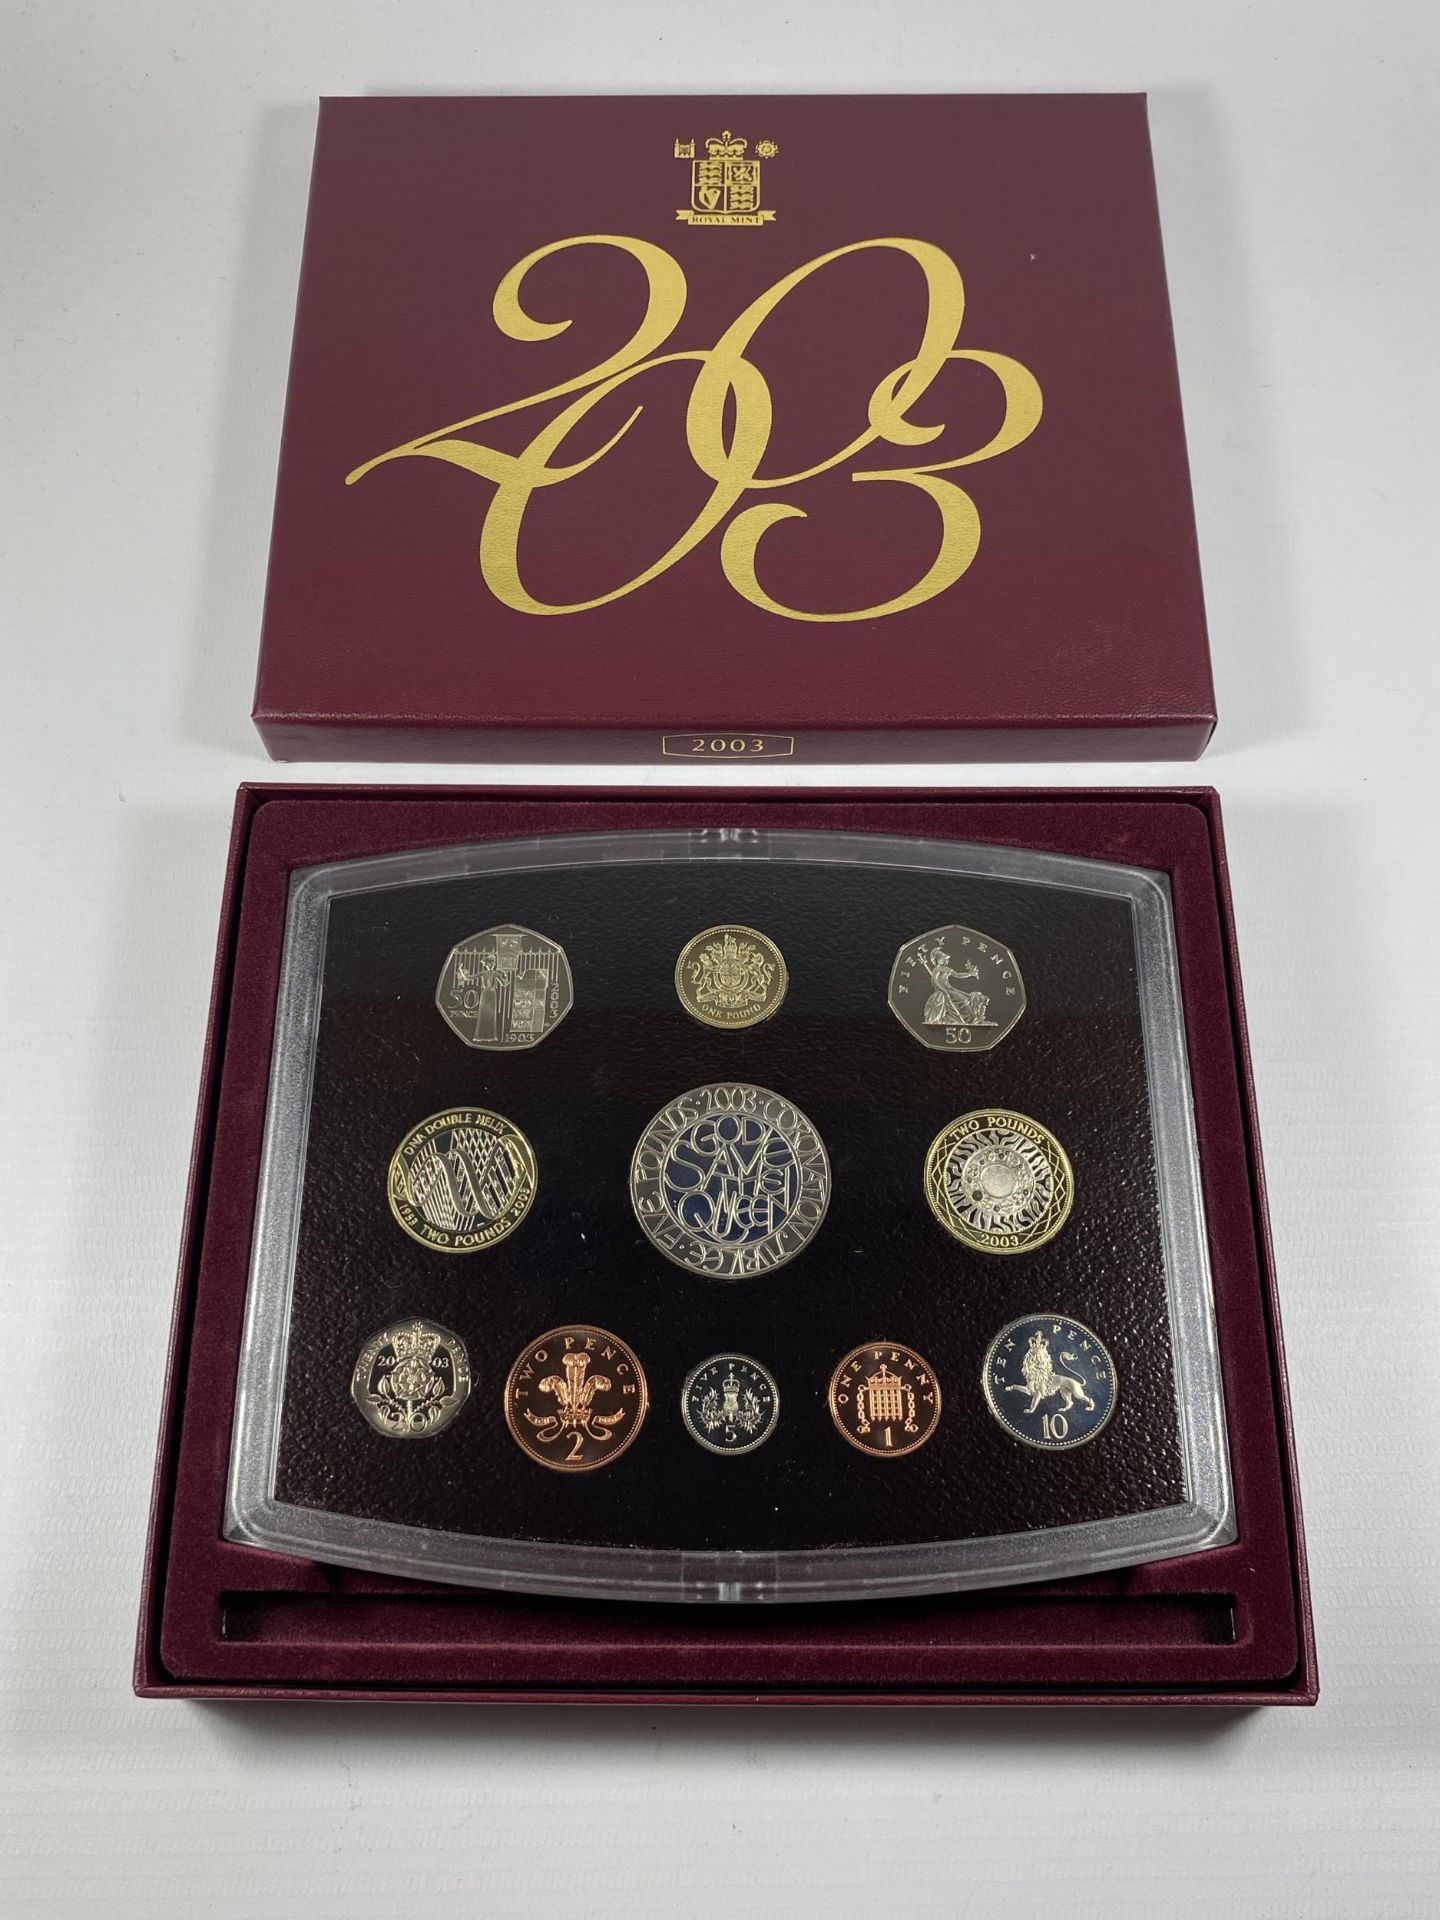 A 2003 ROYAL MINT CASED PROOF COIN SET